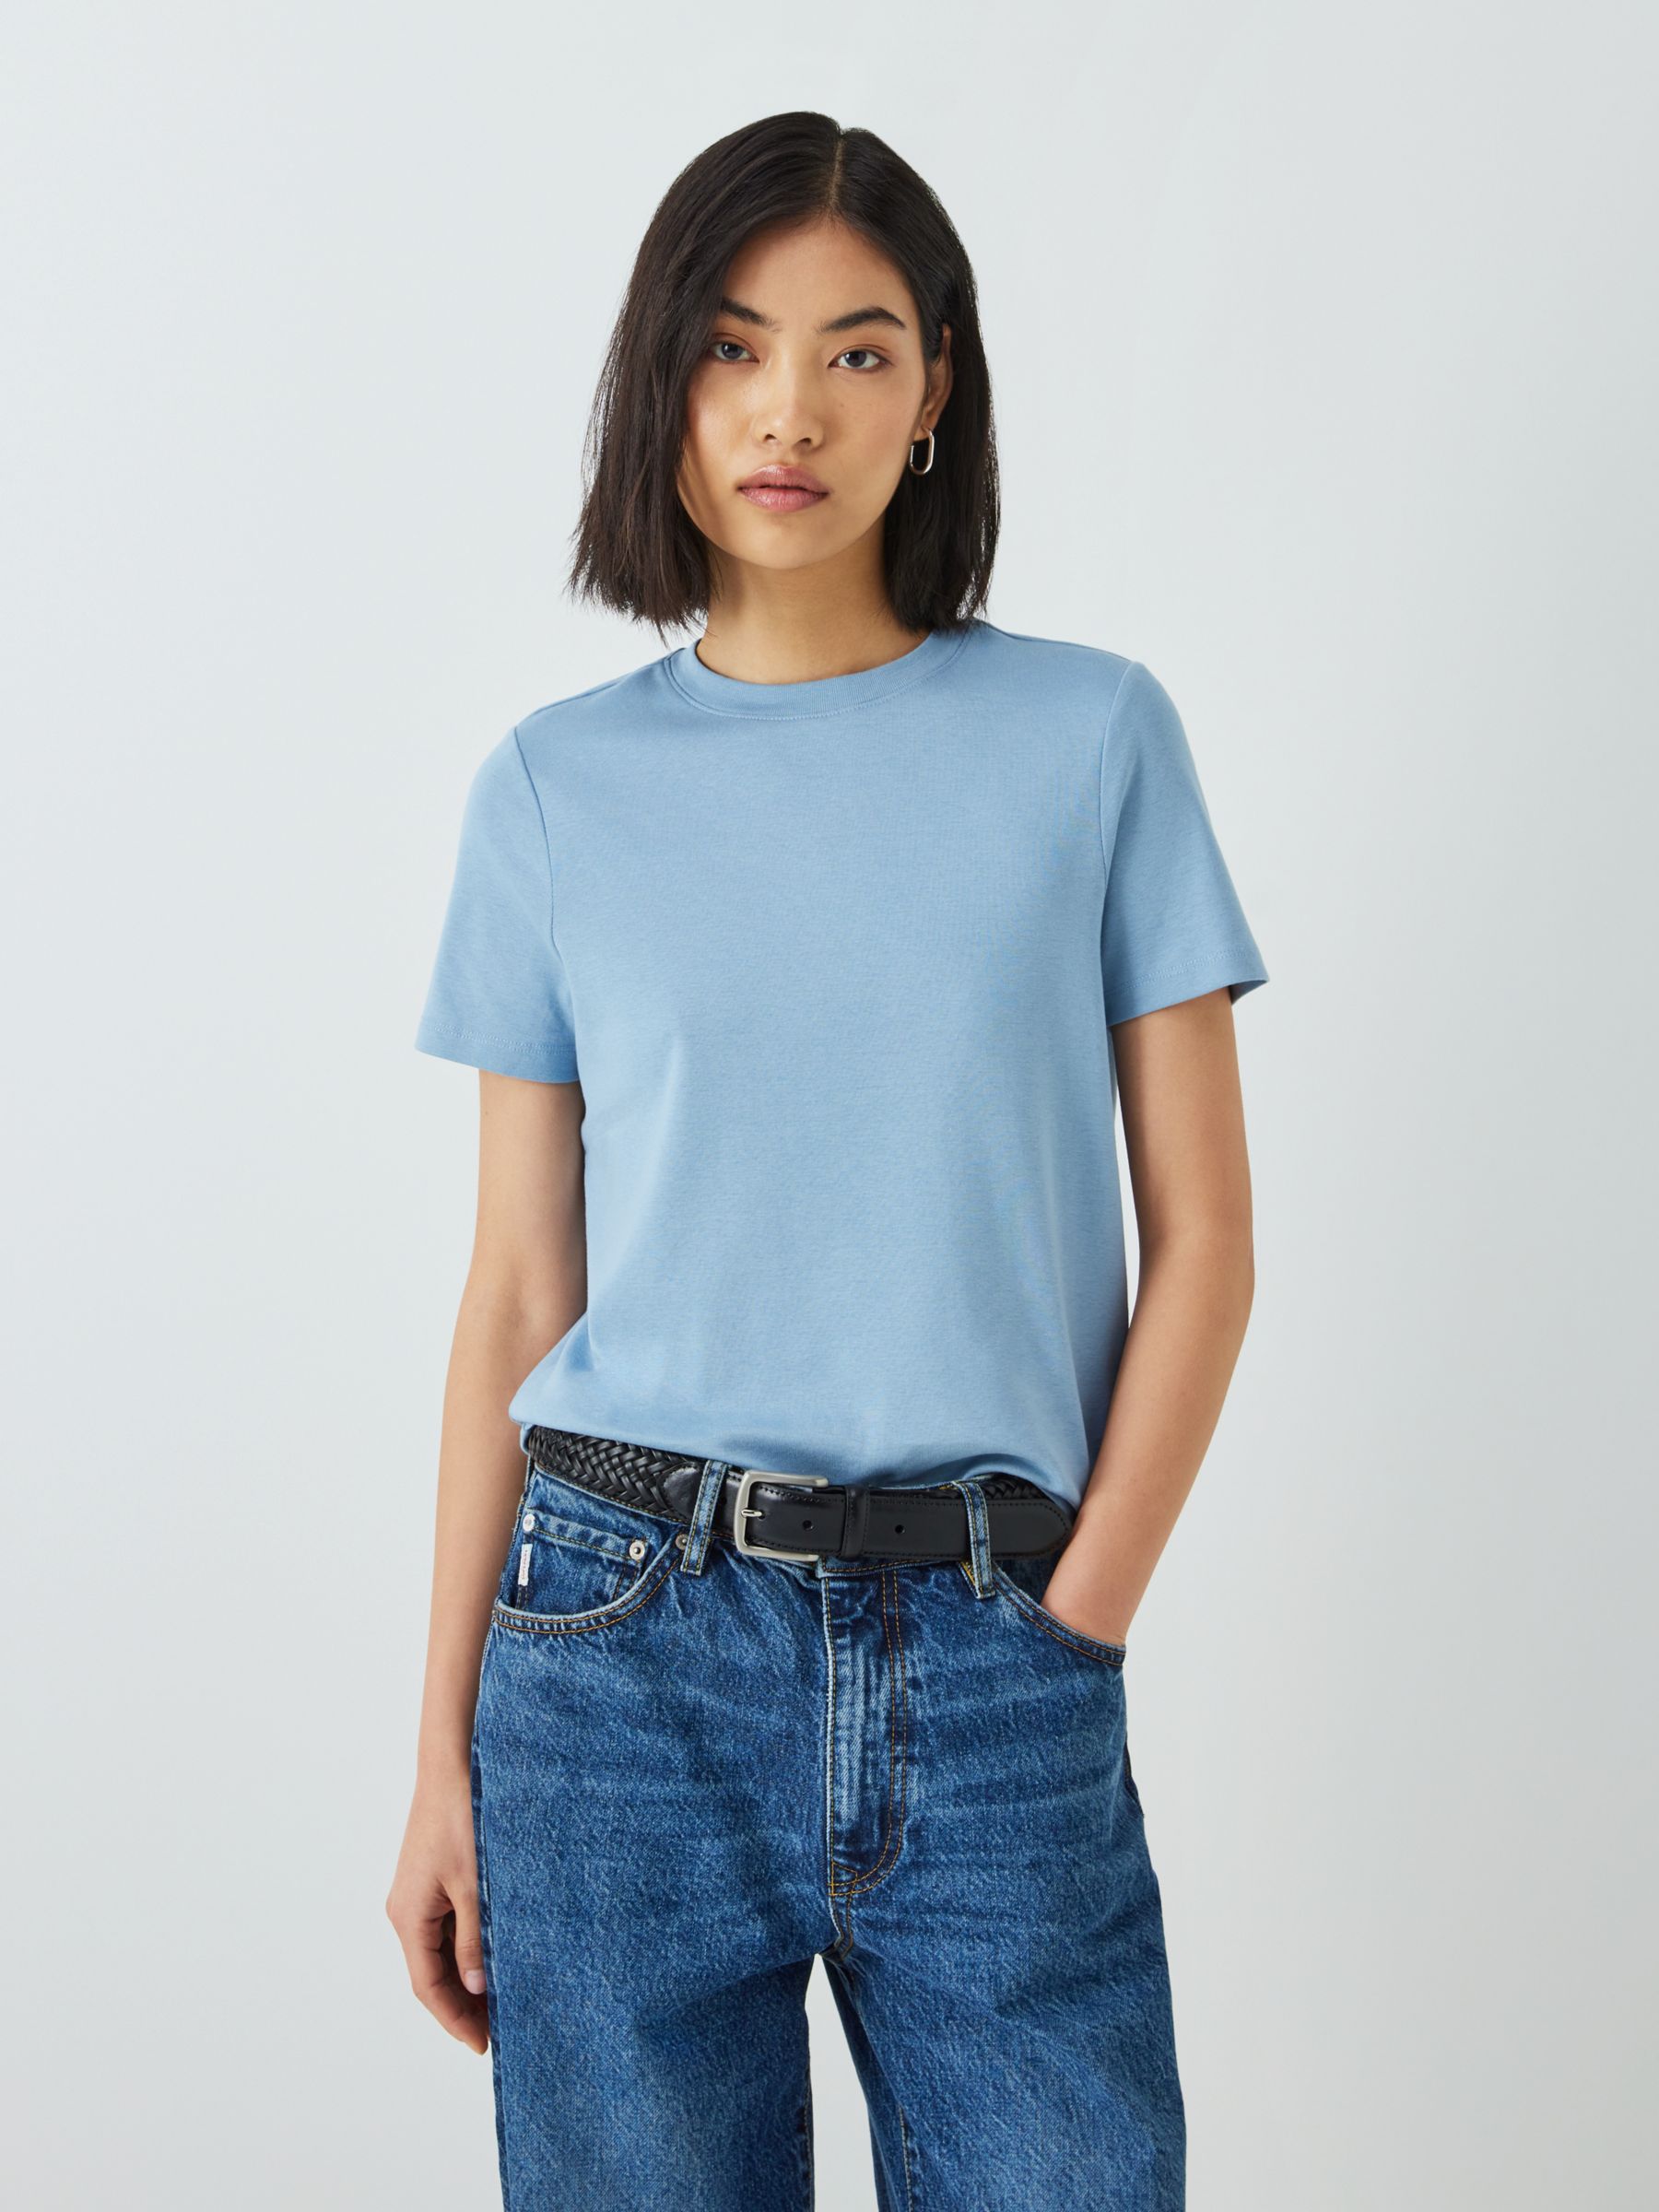 Lace V-Neck Short Sleeve Top in Linen Blend Blue, Tops & T-shirts